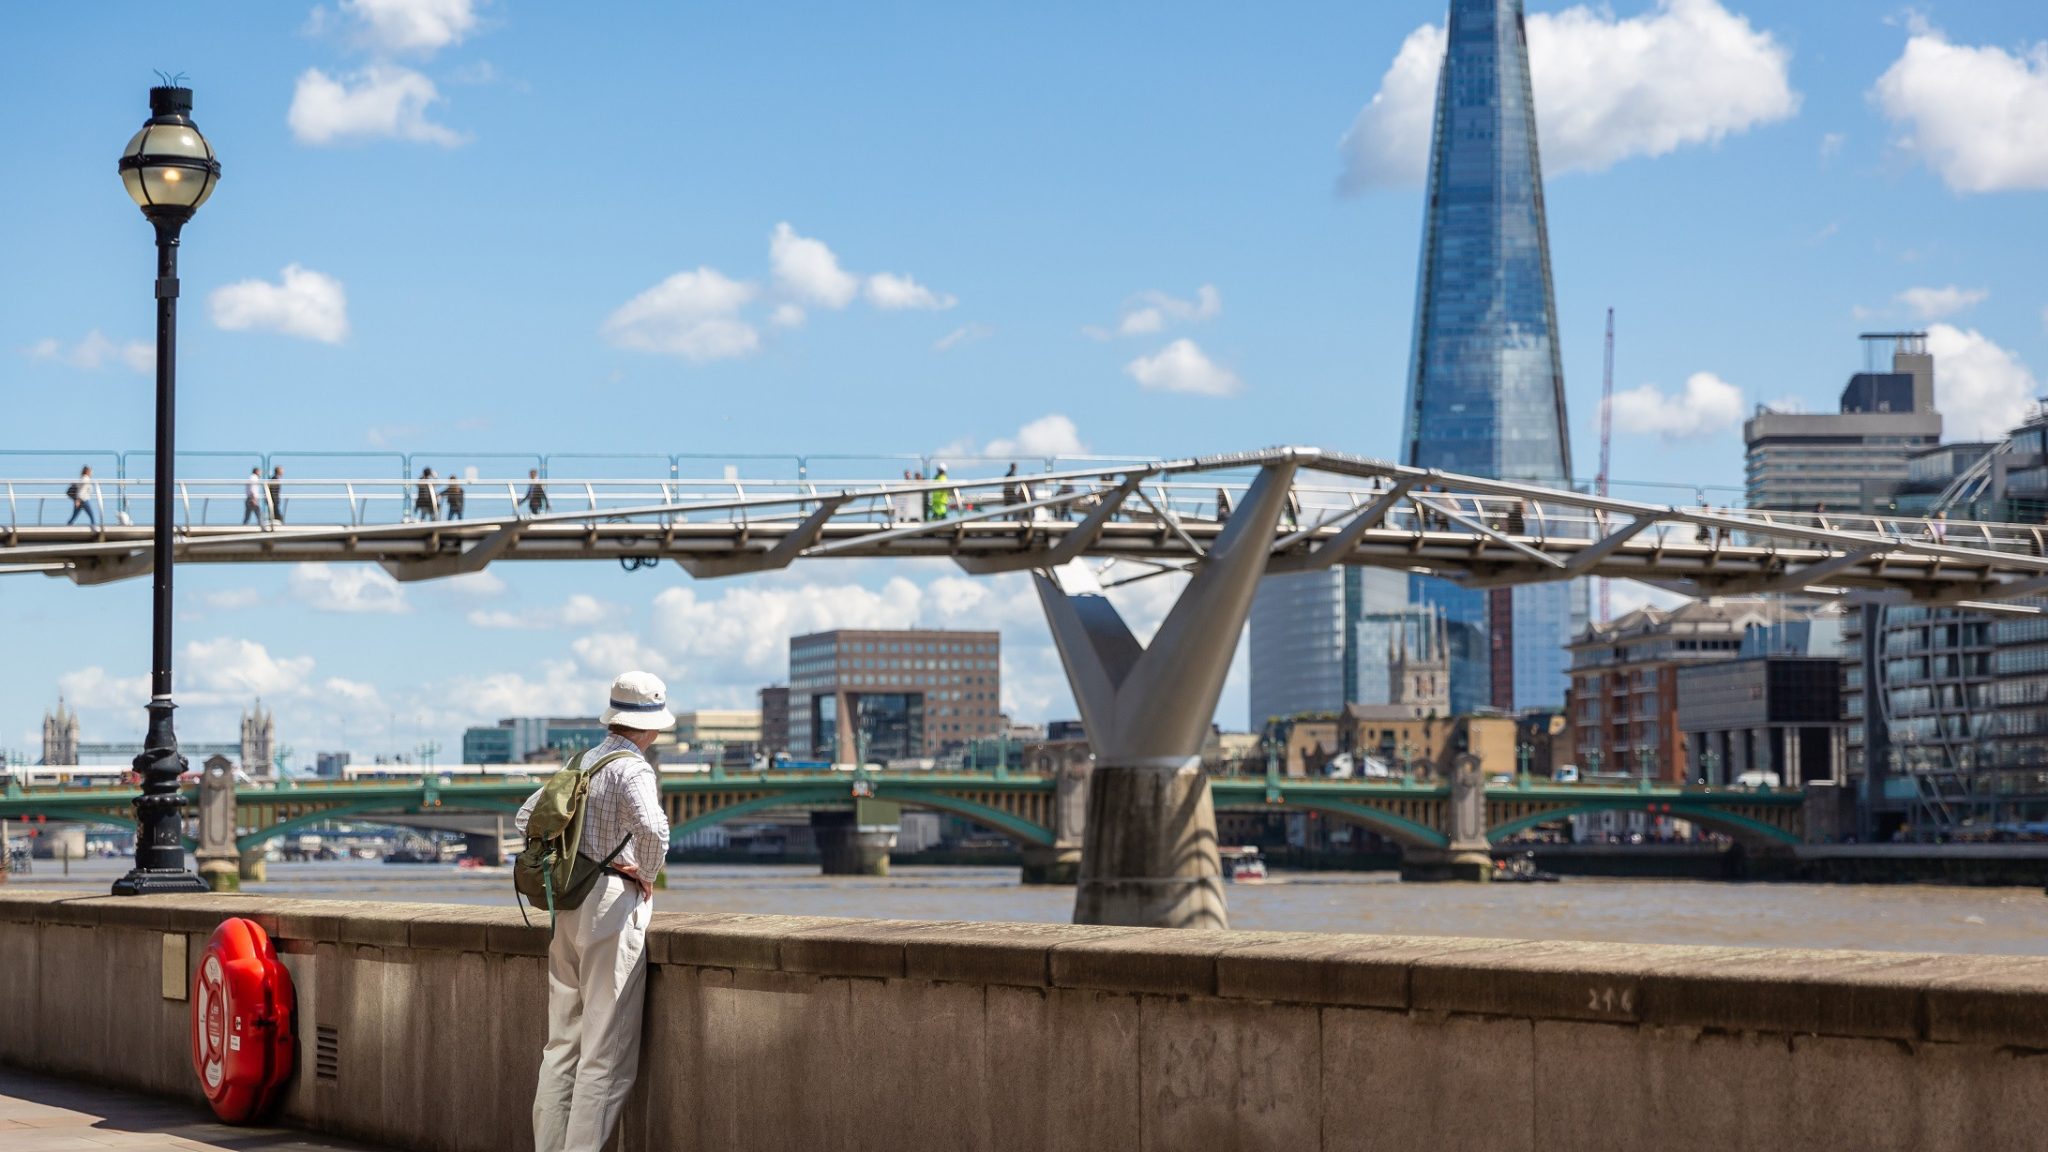 A view of Millennium Bridge with the Shard in the background